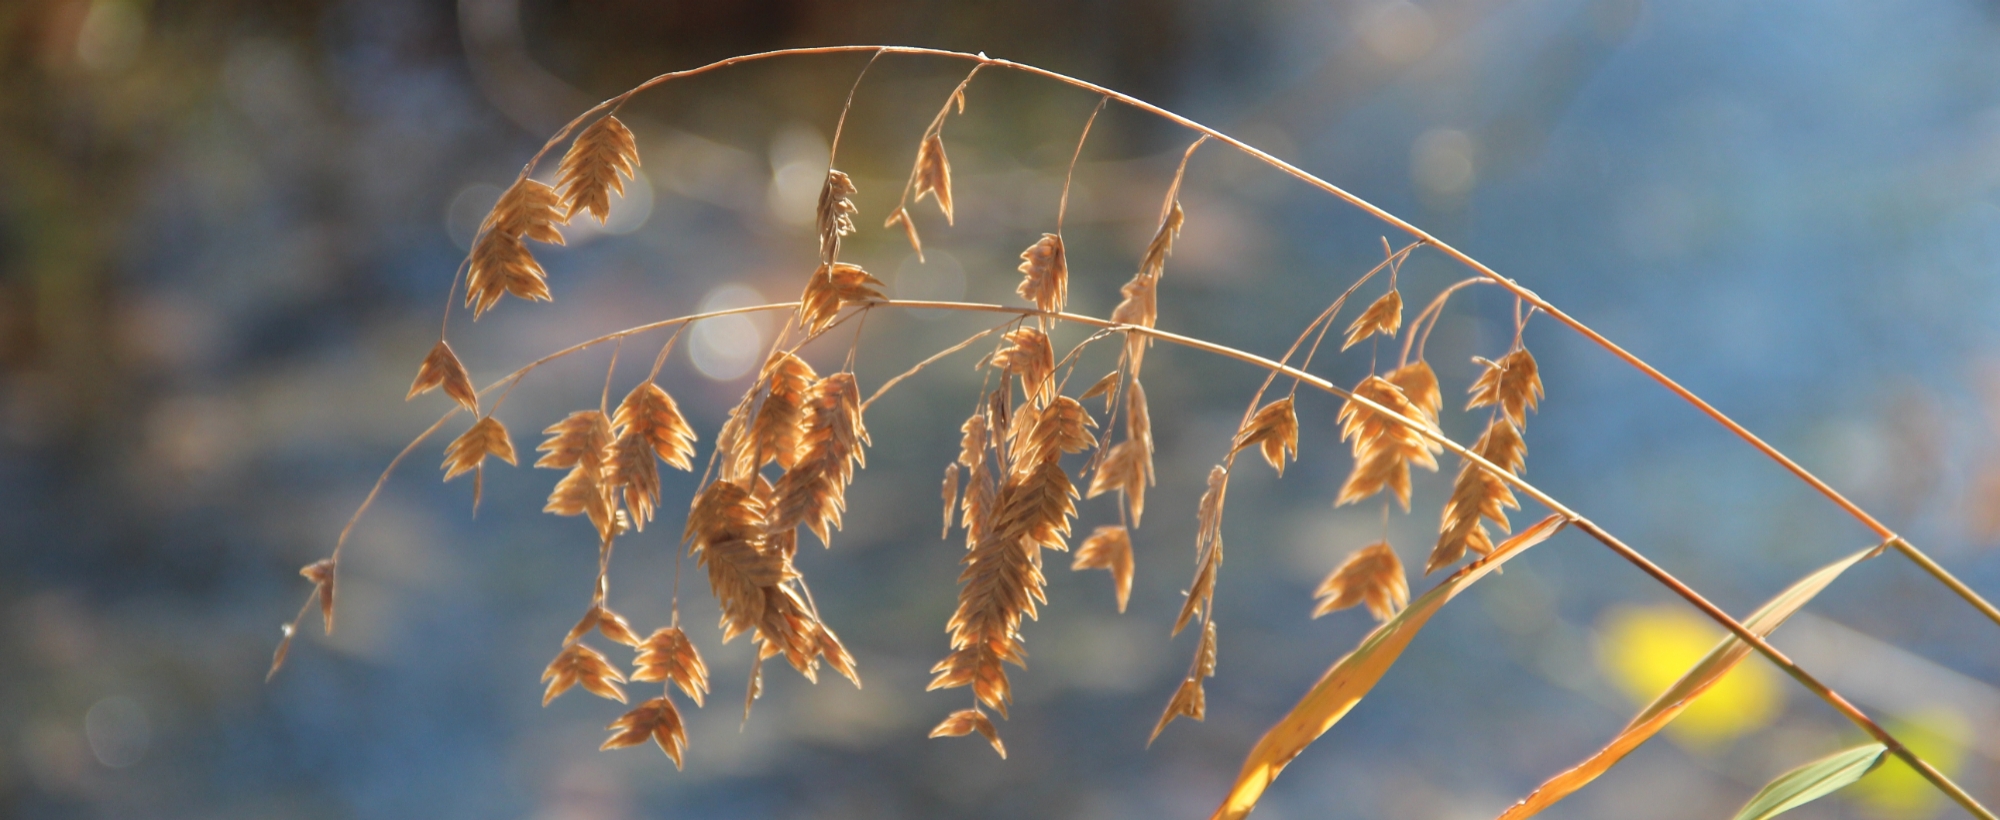 Fish-on-a-pole grass in autumn